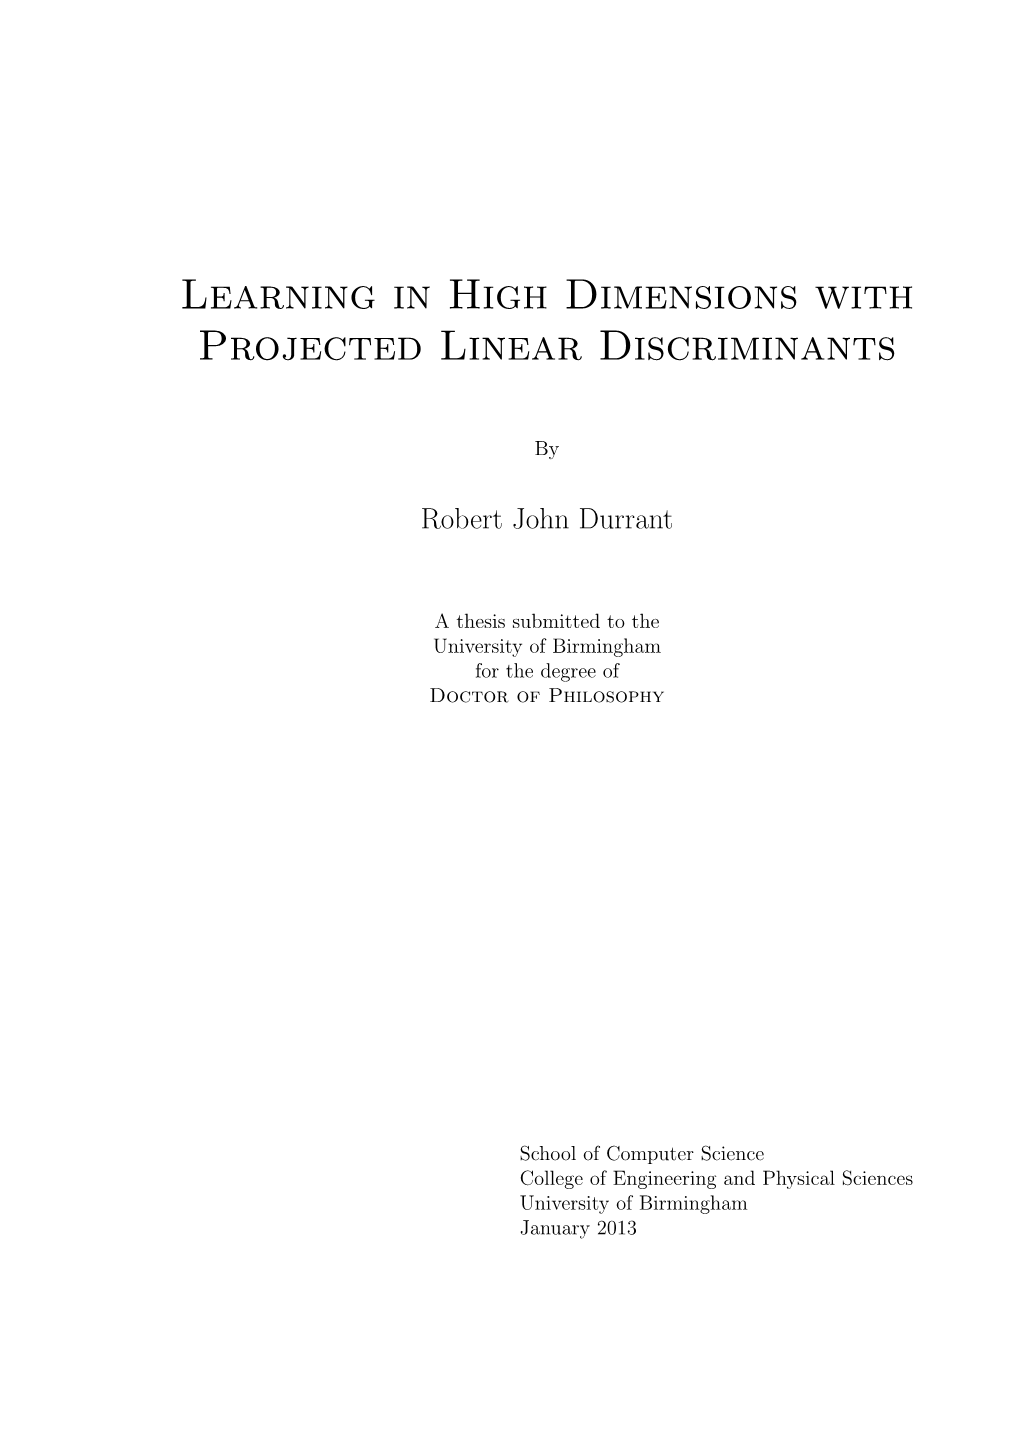 Learning in High Dimensions with Projected Linear Discriminants